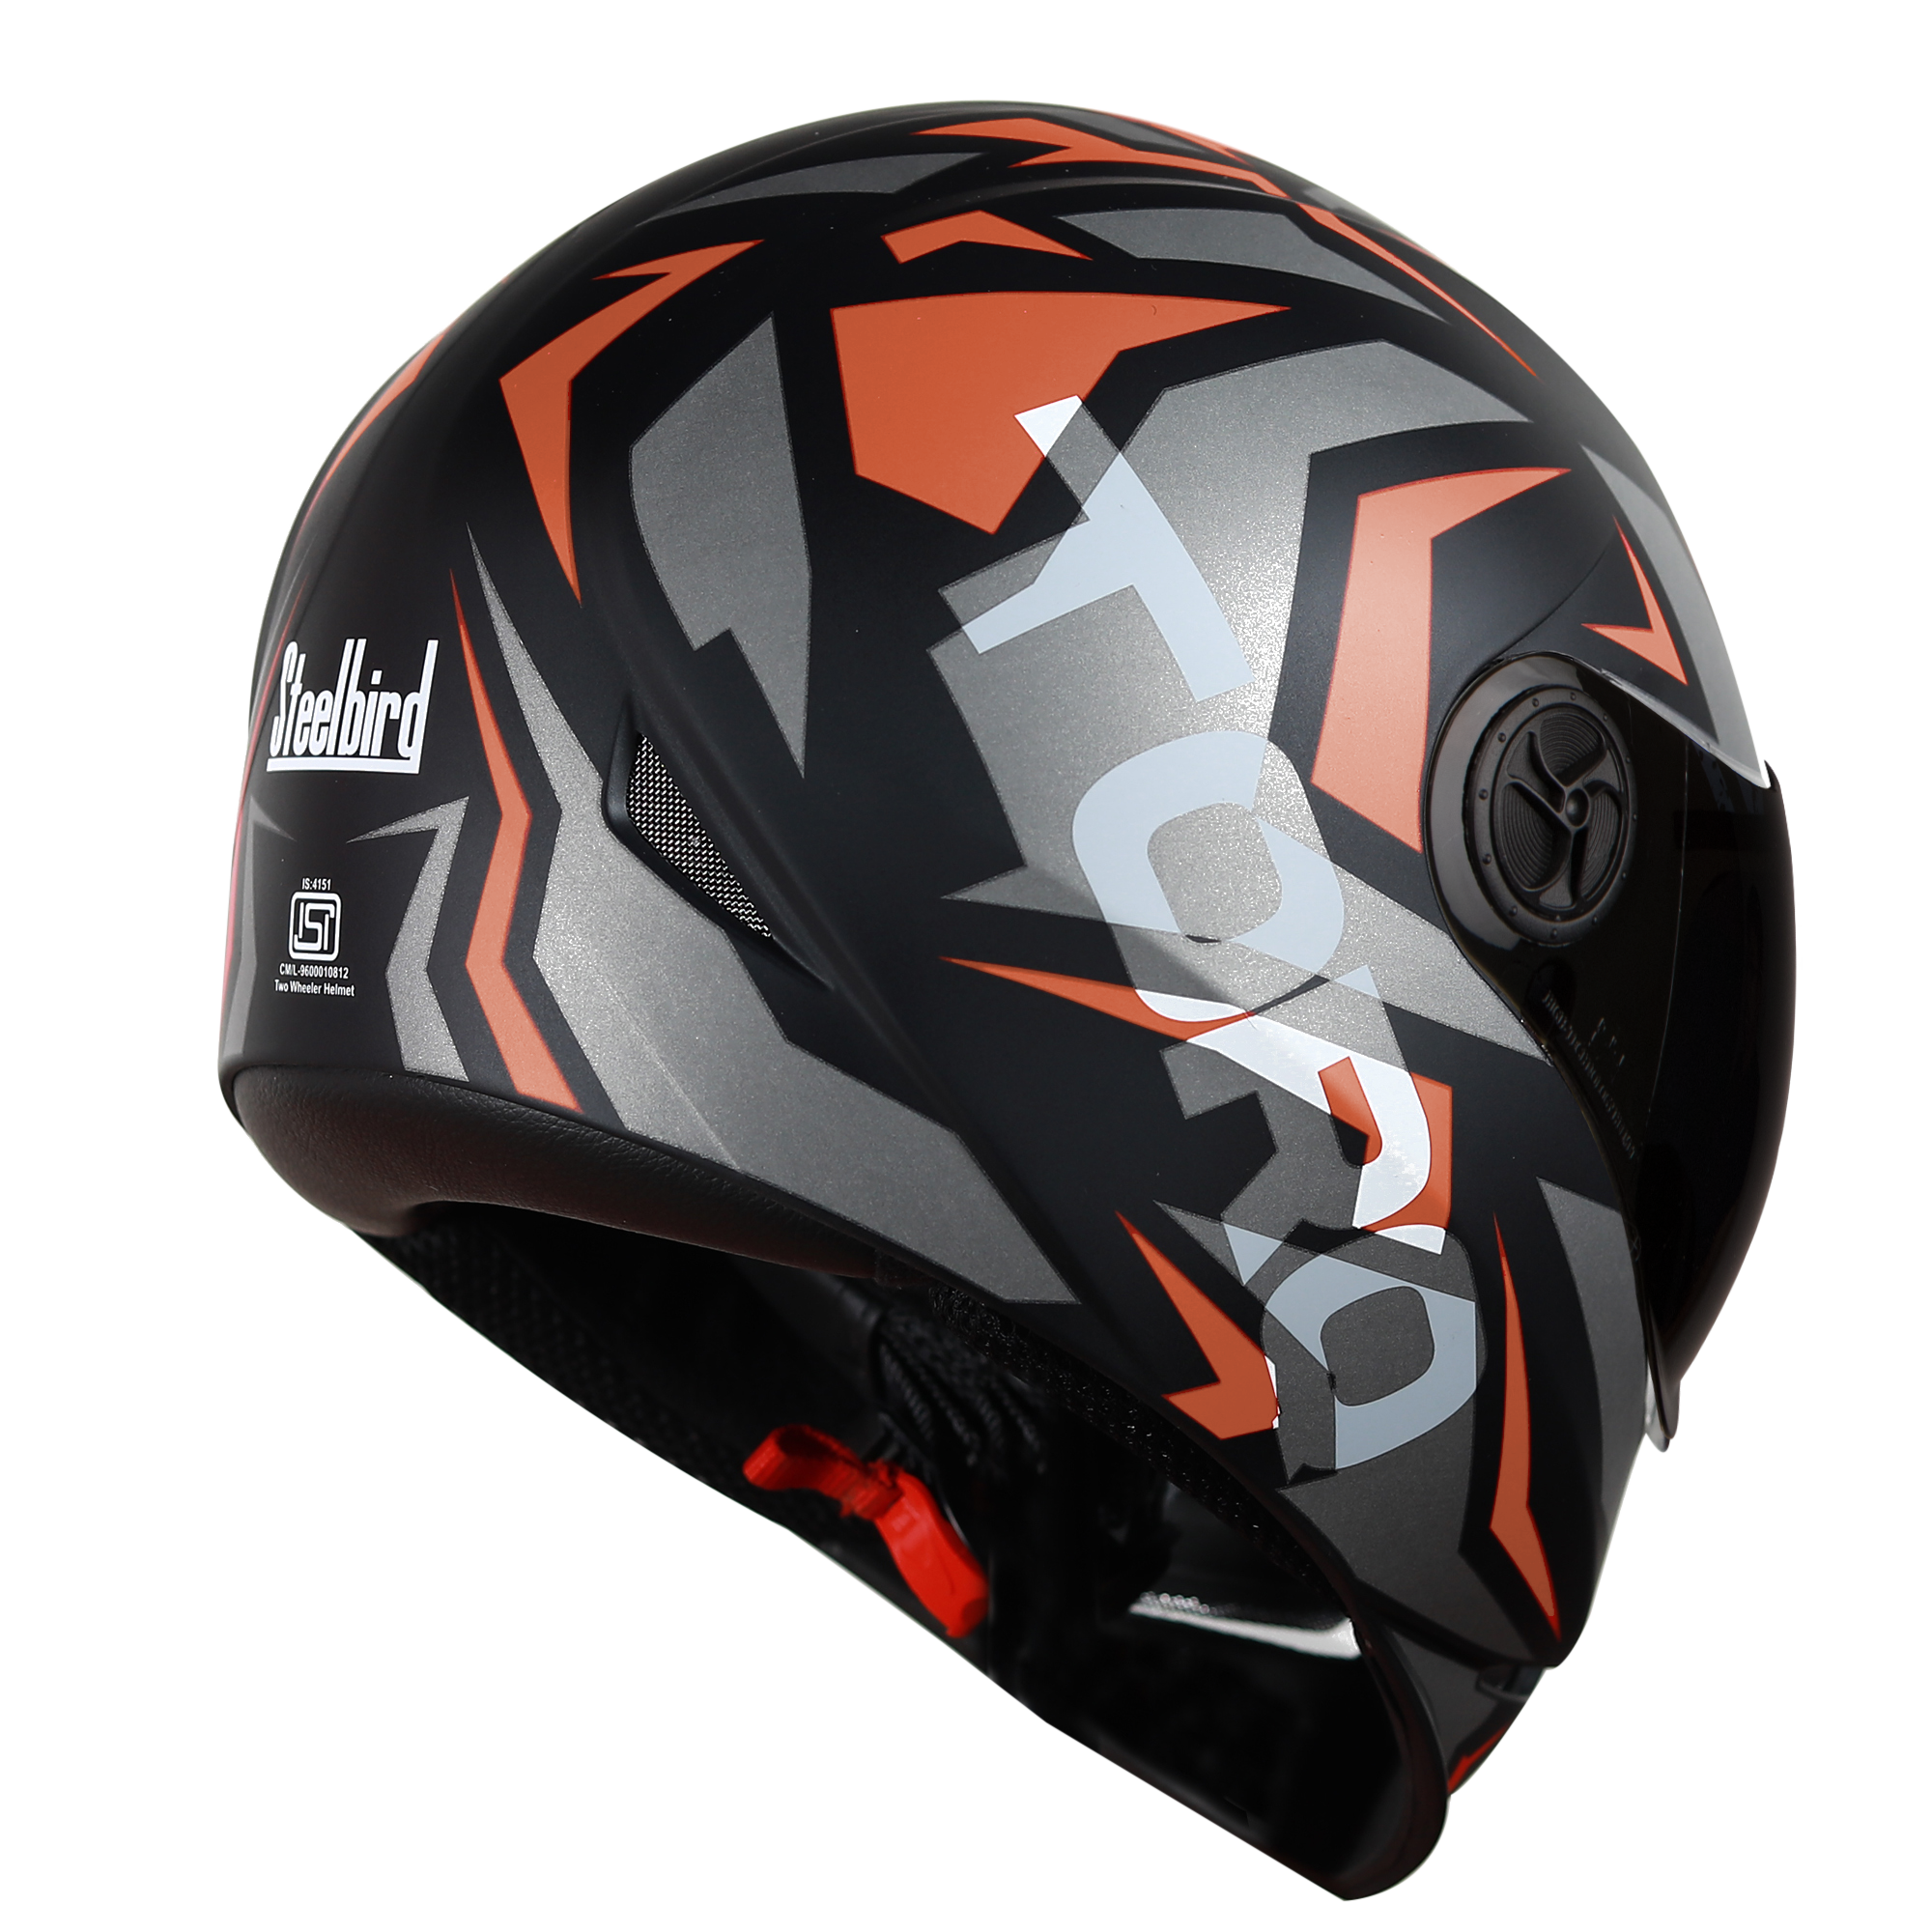 Adonis Torq Mat Black With Orange( Fitted With Clear Visor Extra Smoke Visor Free)